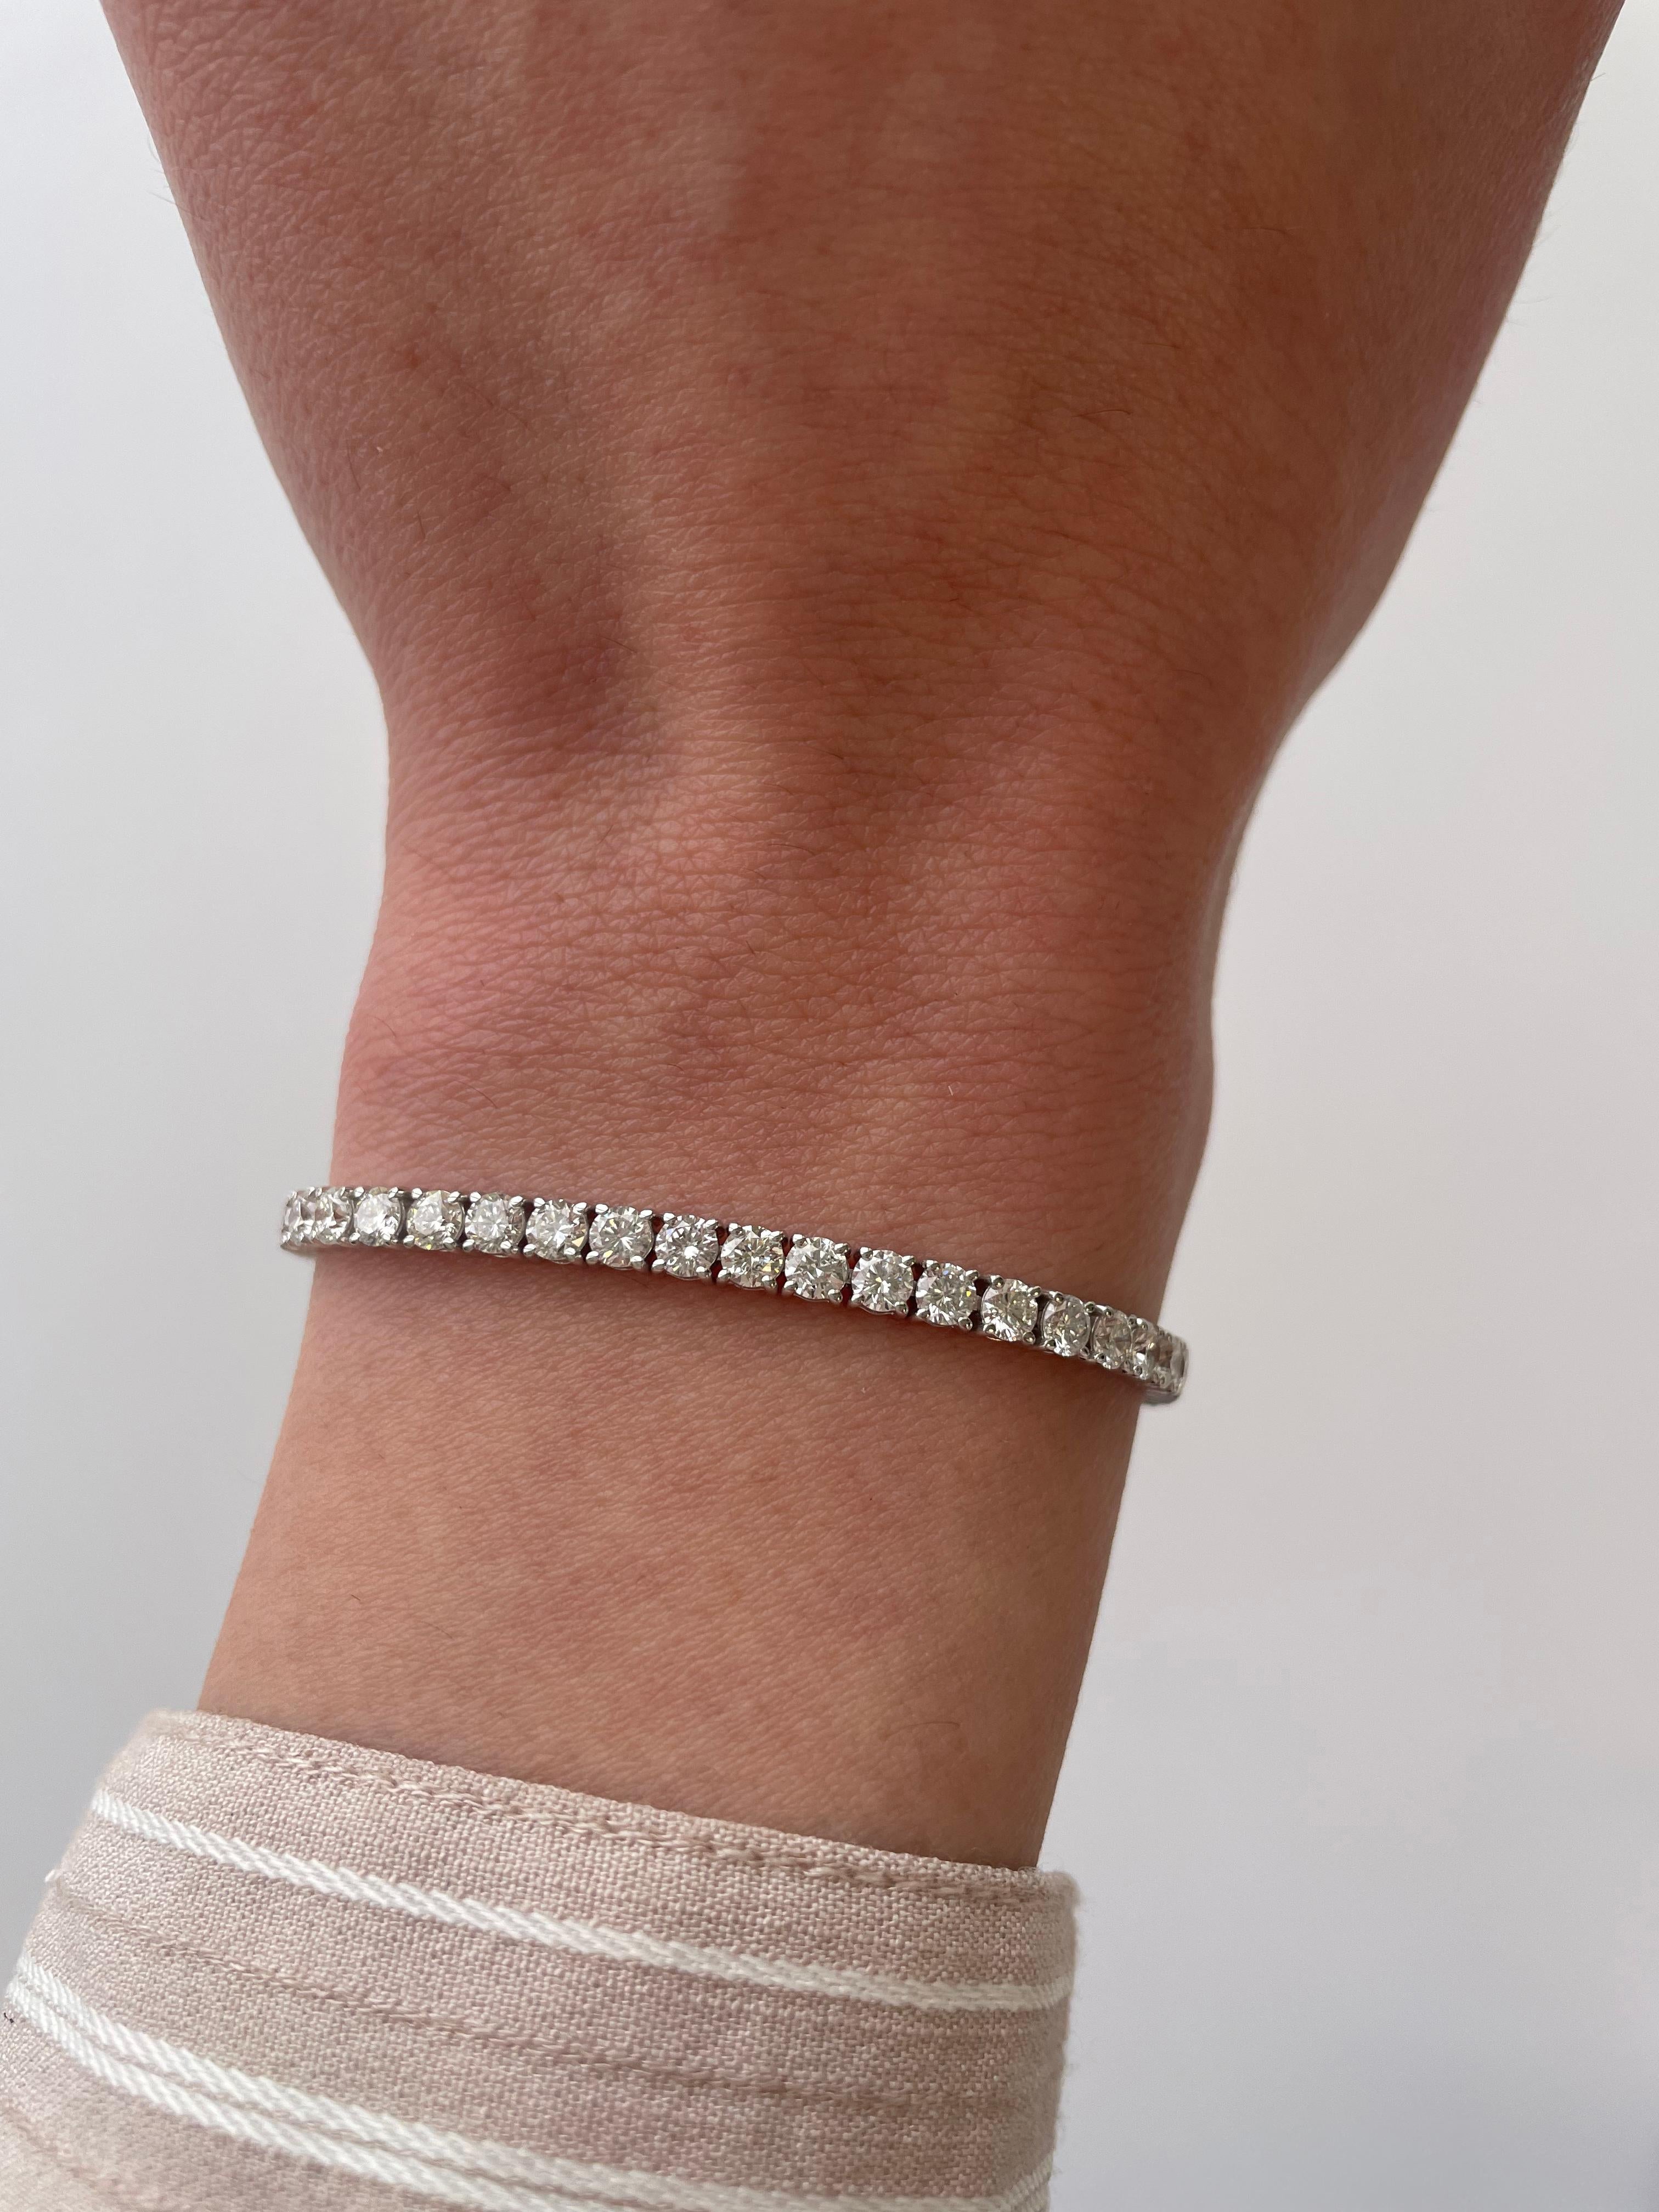 Exquisite and timeless diamonds tennis bracelet, by Alexander Beverly Hills.
53 round brilliant diamonds, 6.45 carats. Approximately D-F color and SI clarity. Four prong set in 18k white gold, 8.42 grams, 7 inches. 
Accommodated with an up-to-date